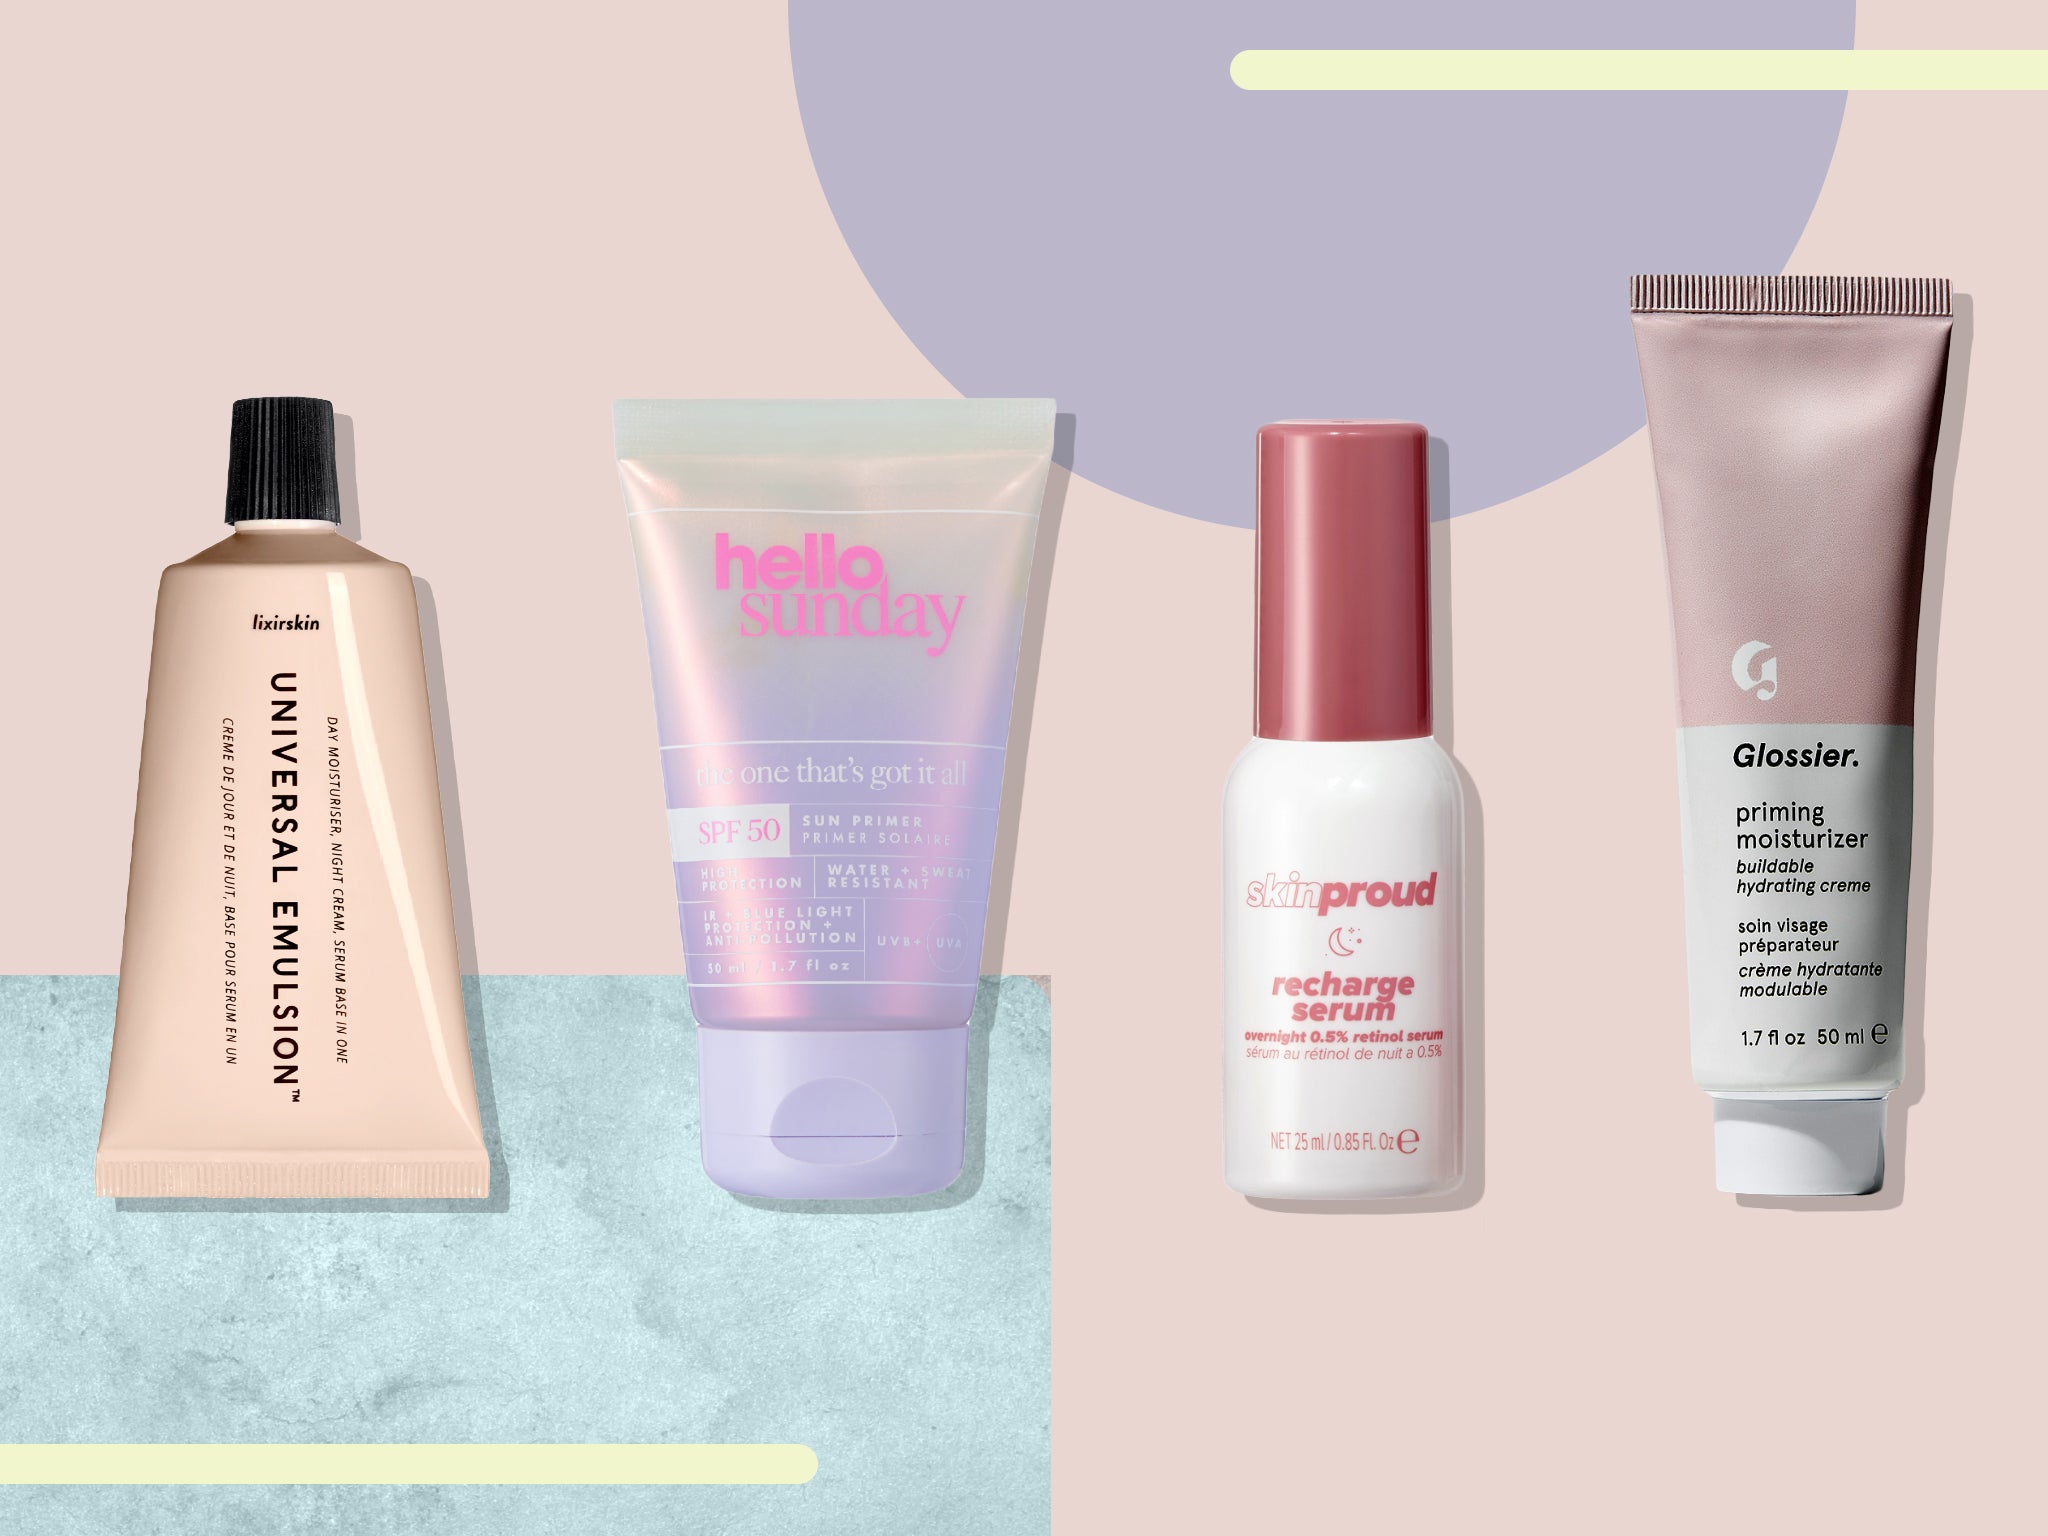 Simplifying your skincare doesn’t mean losing out on results